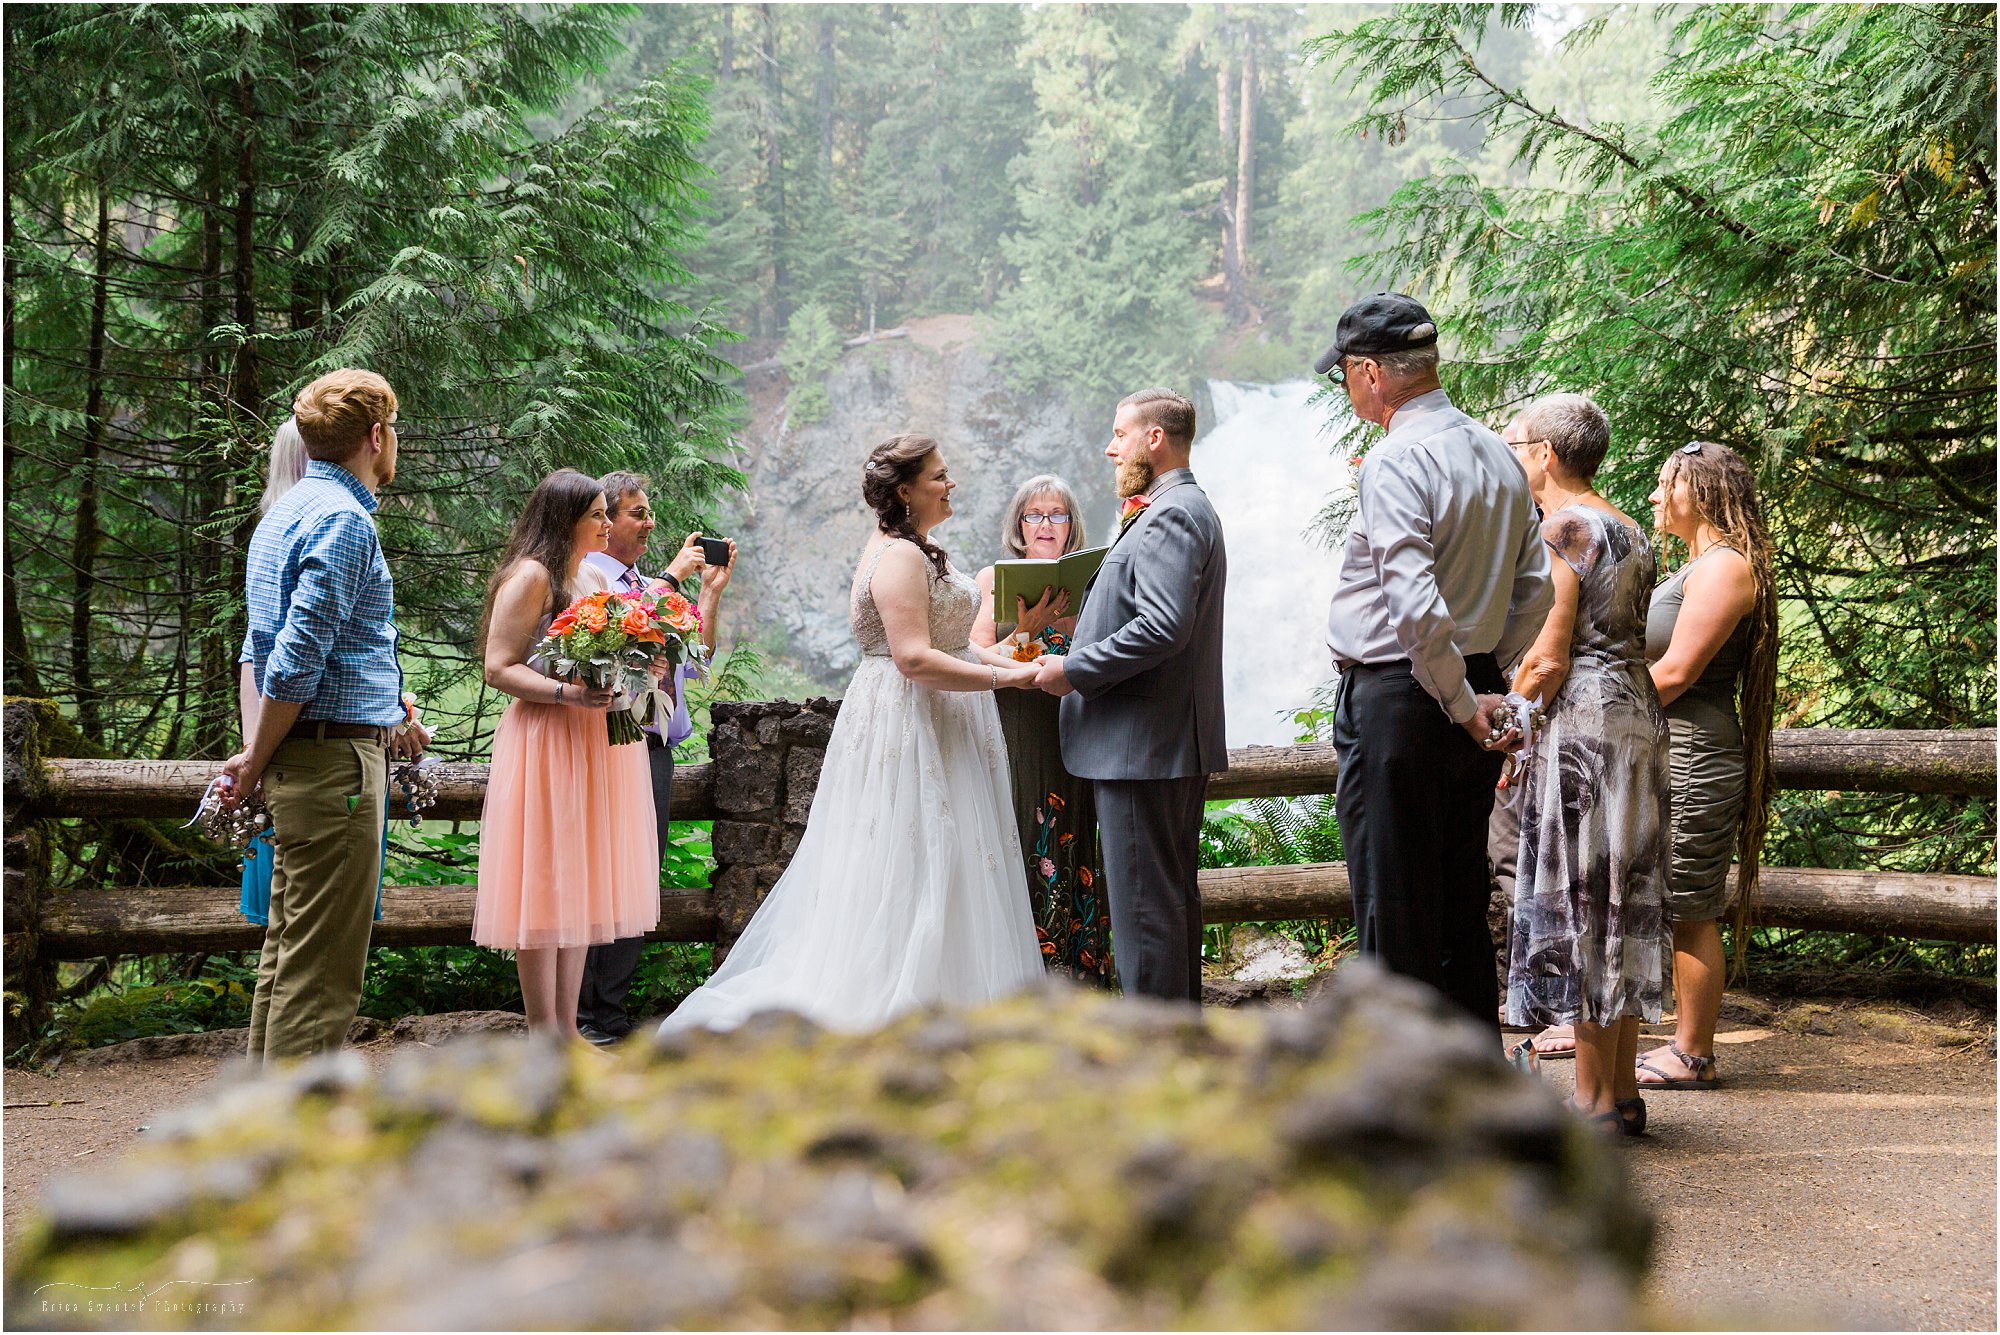 The magical forest and waterfall landscape in Oregon is the perfect place for your intimate wedding or elopement. | Erica Swantek Photography